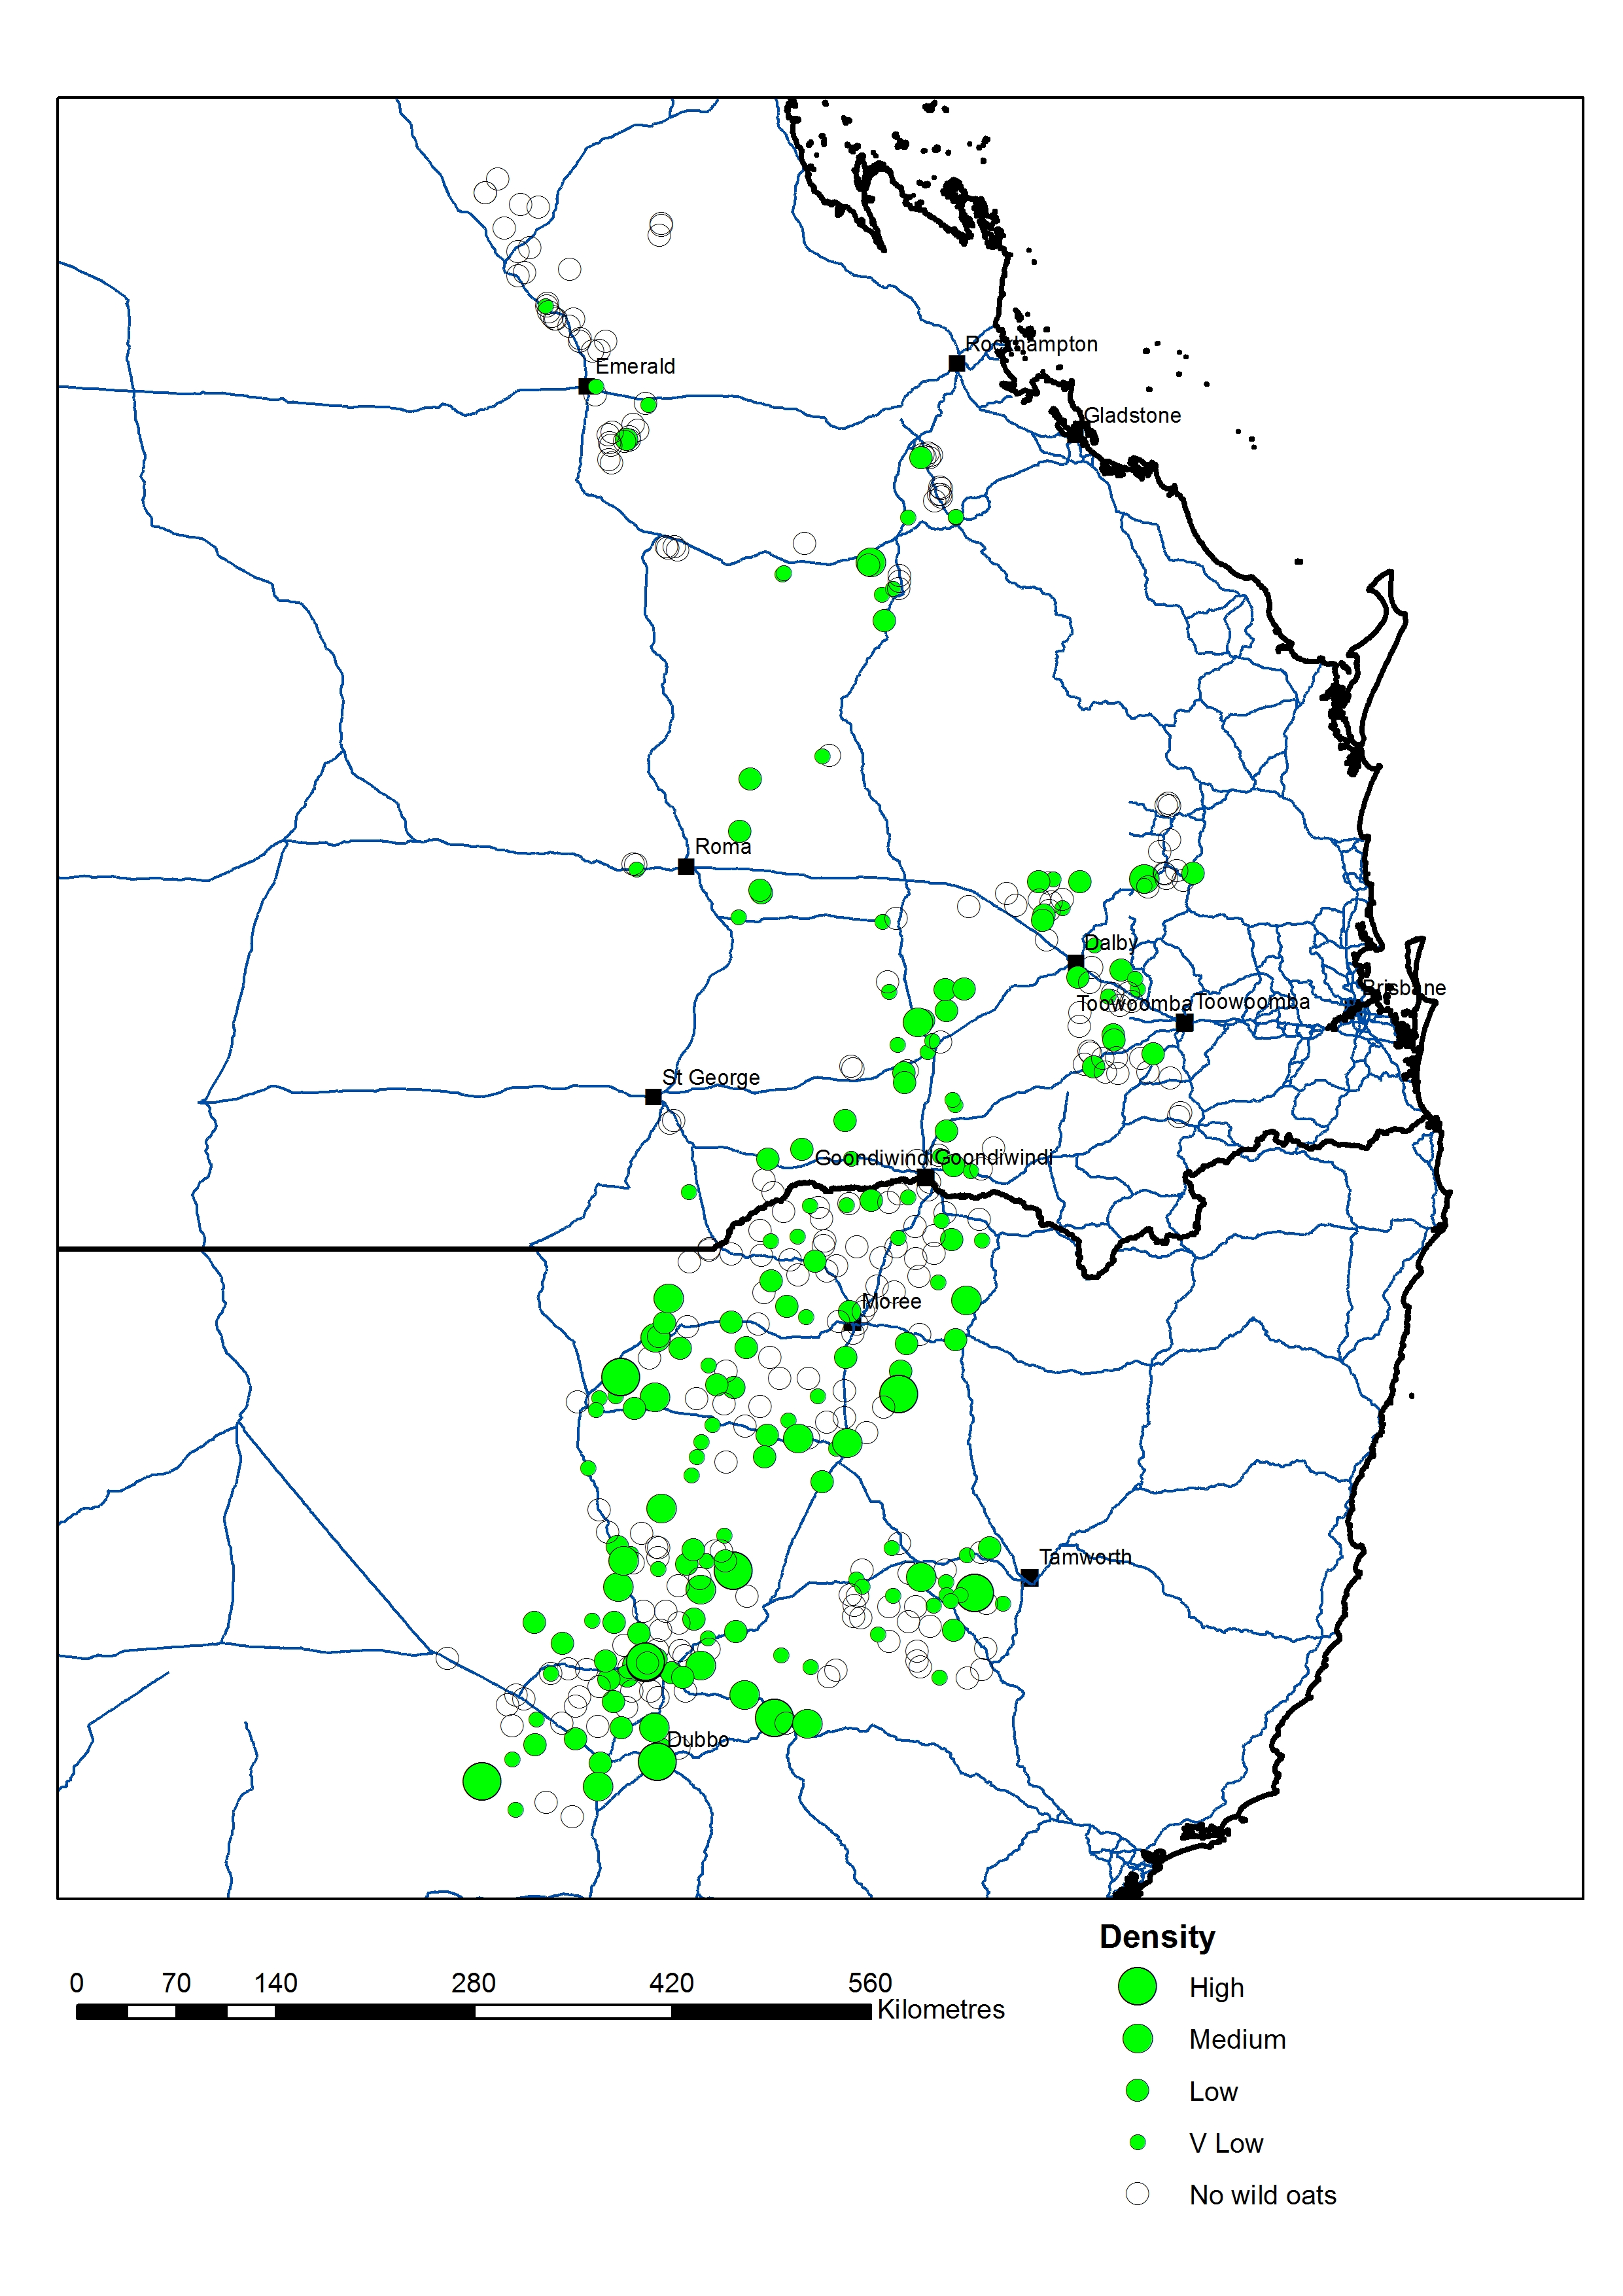 Figure 4 is a map of NSW and Qld showing collection locations of wild oat samples and population density.